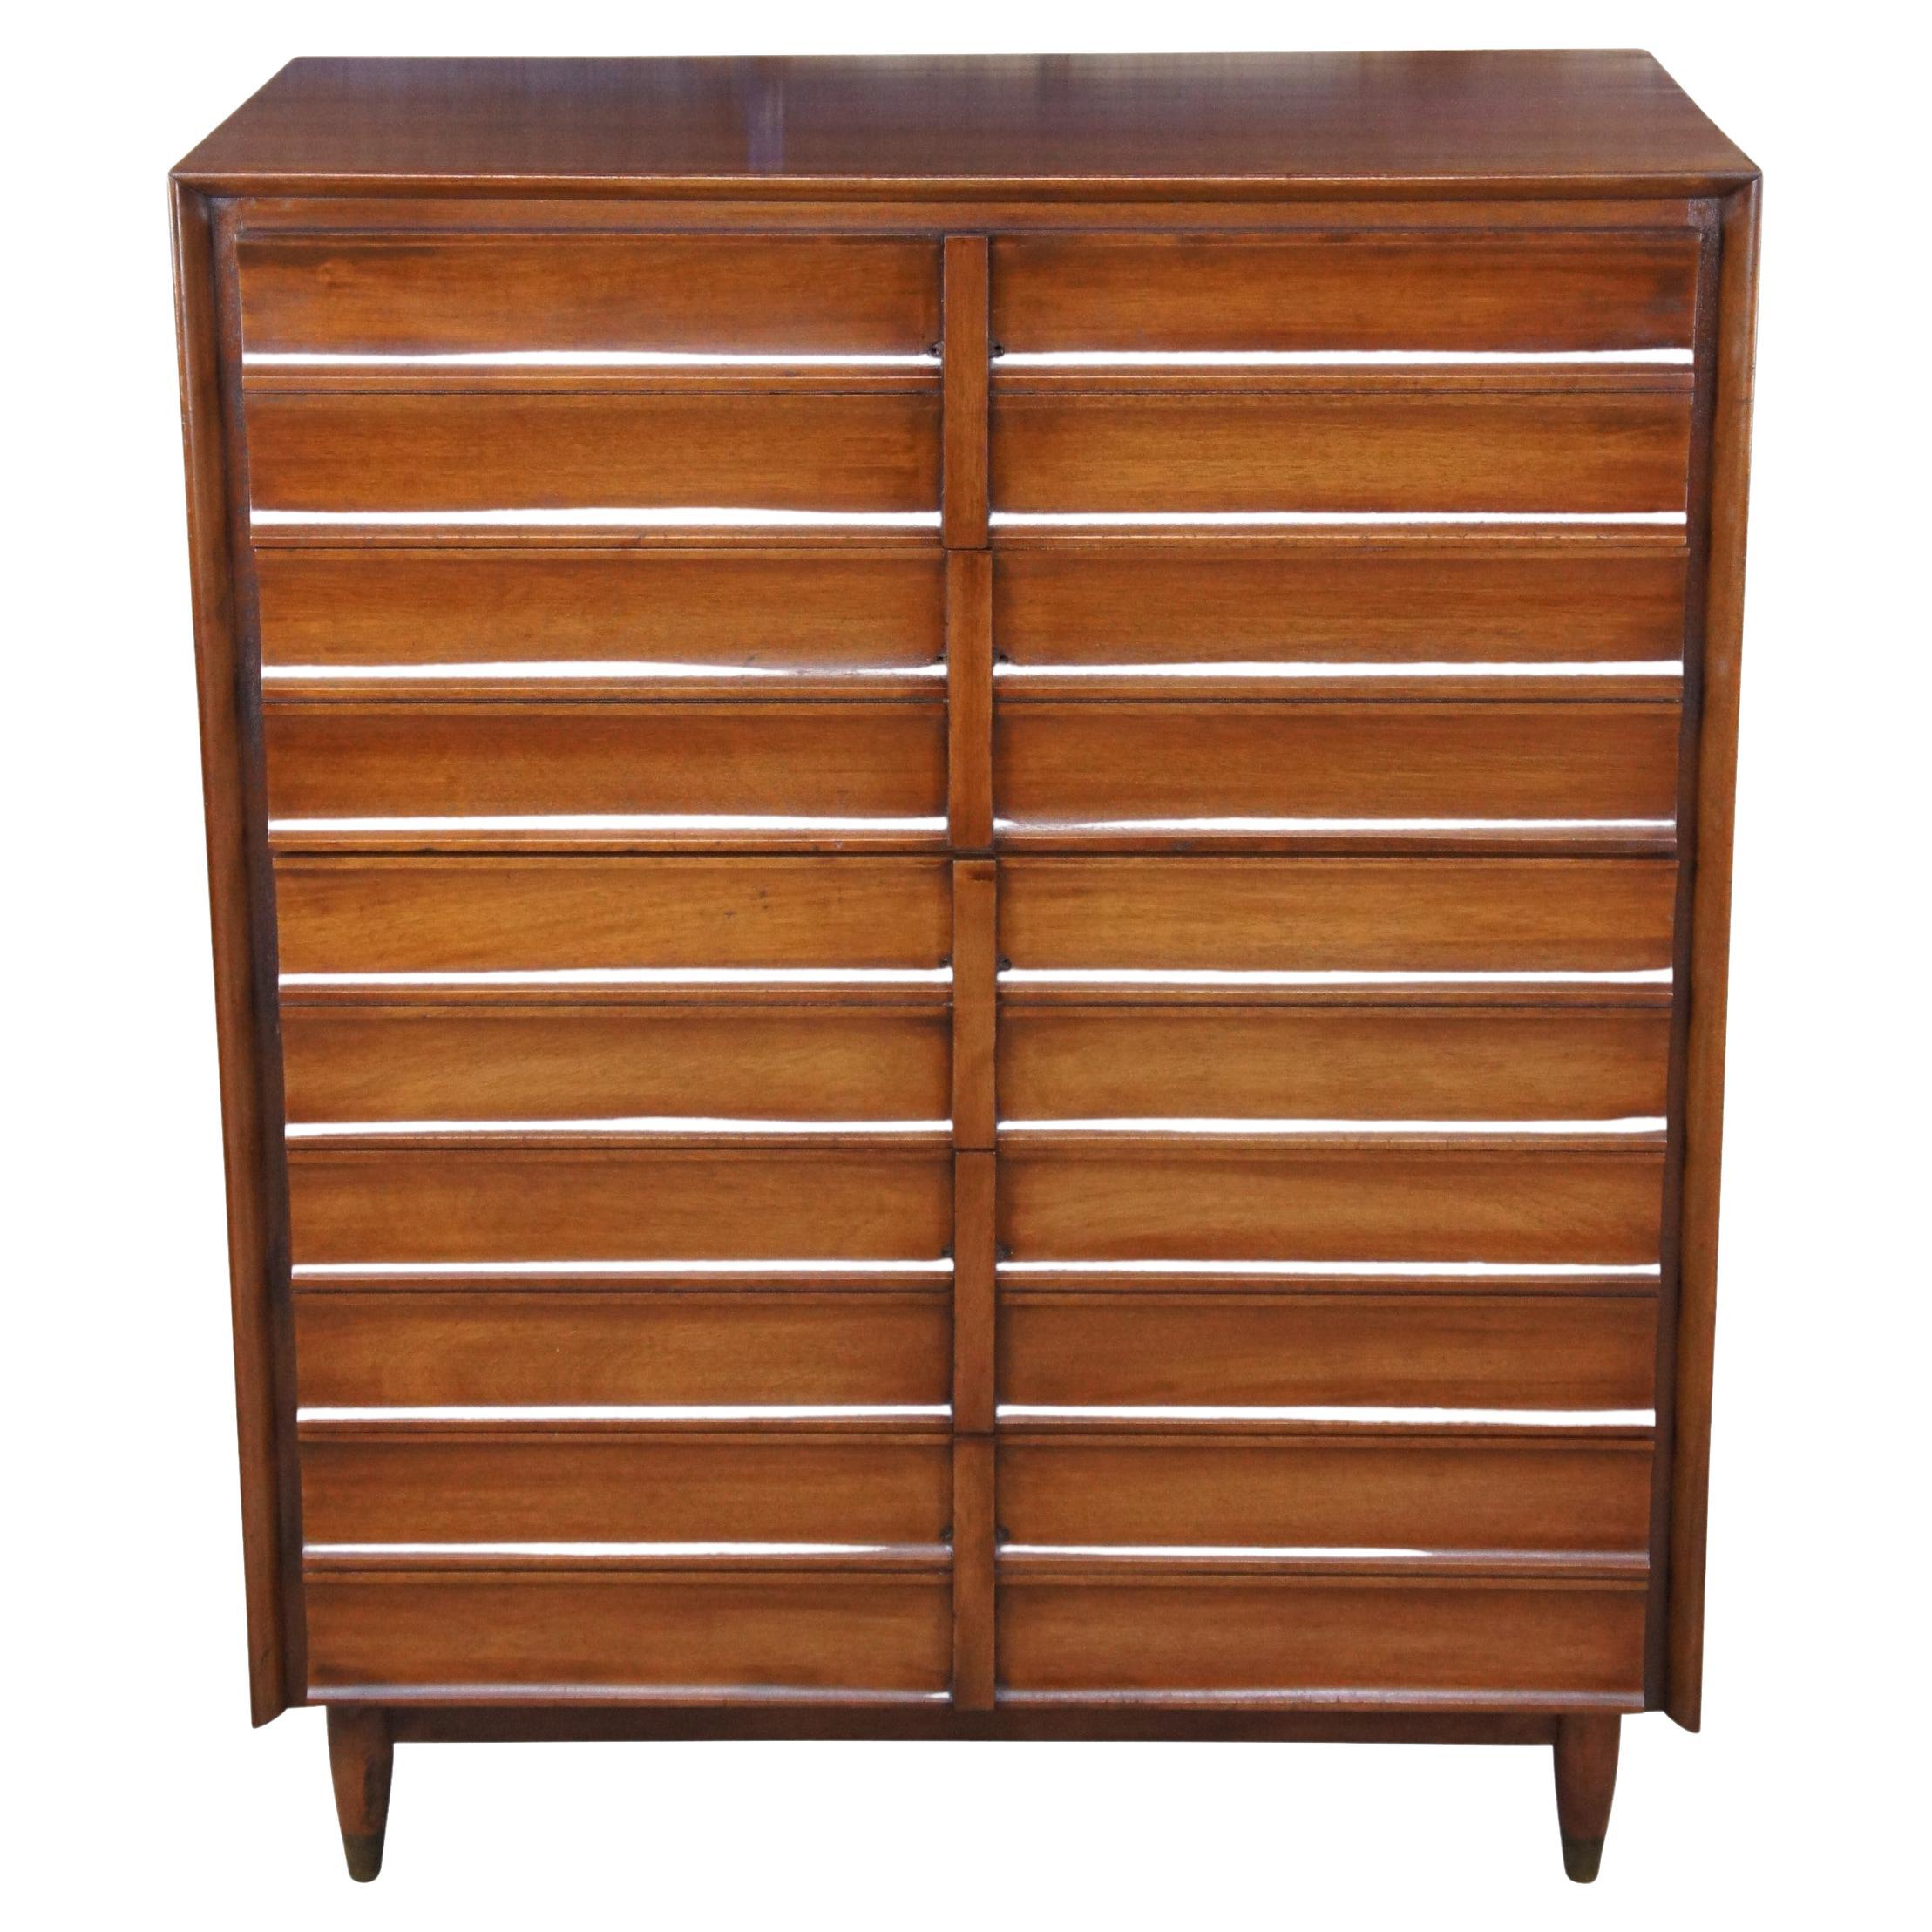 Hungerford Mahogany Mid Century Modern Dresser Tall Chest of Drawers 45"